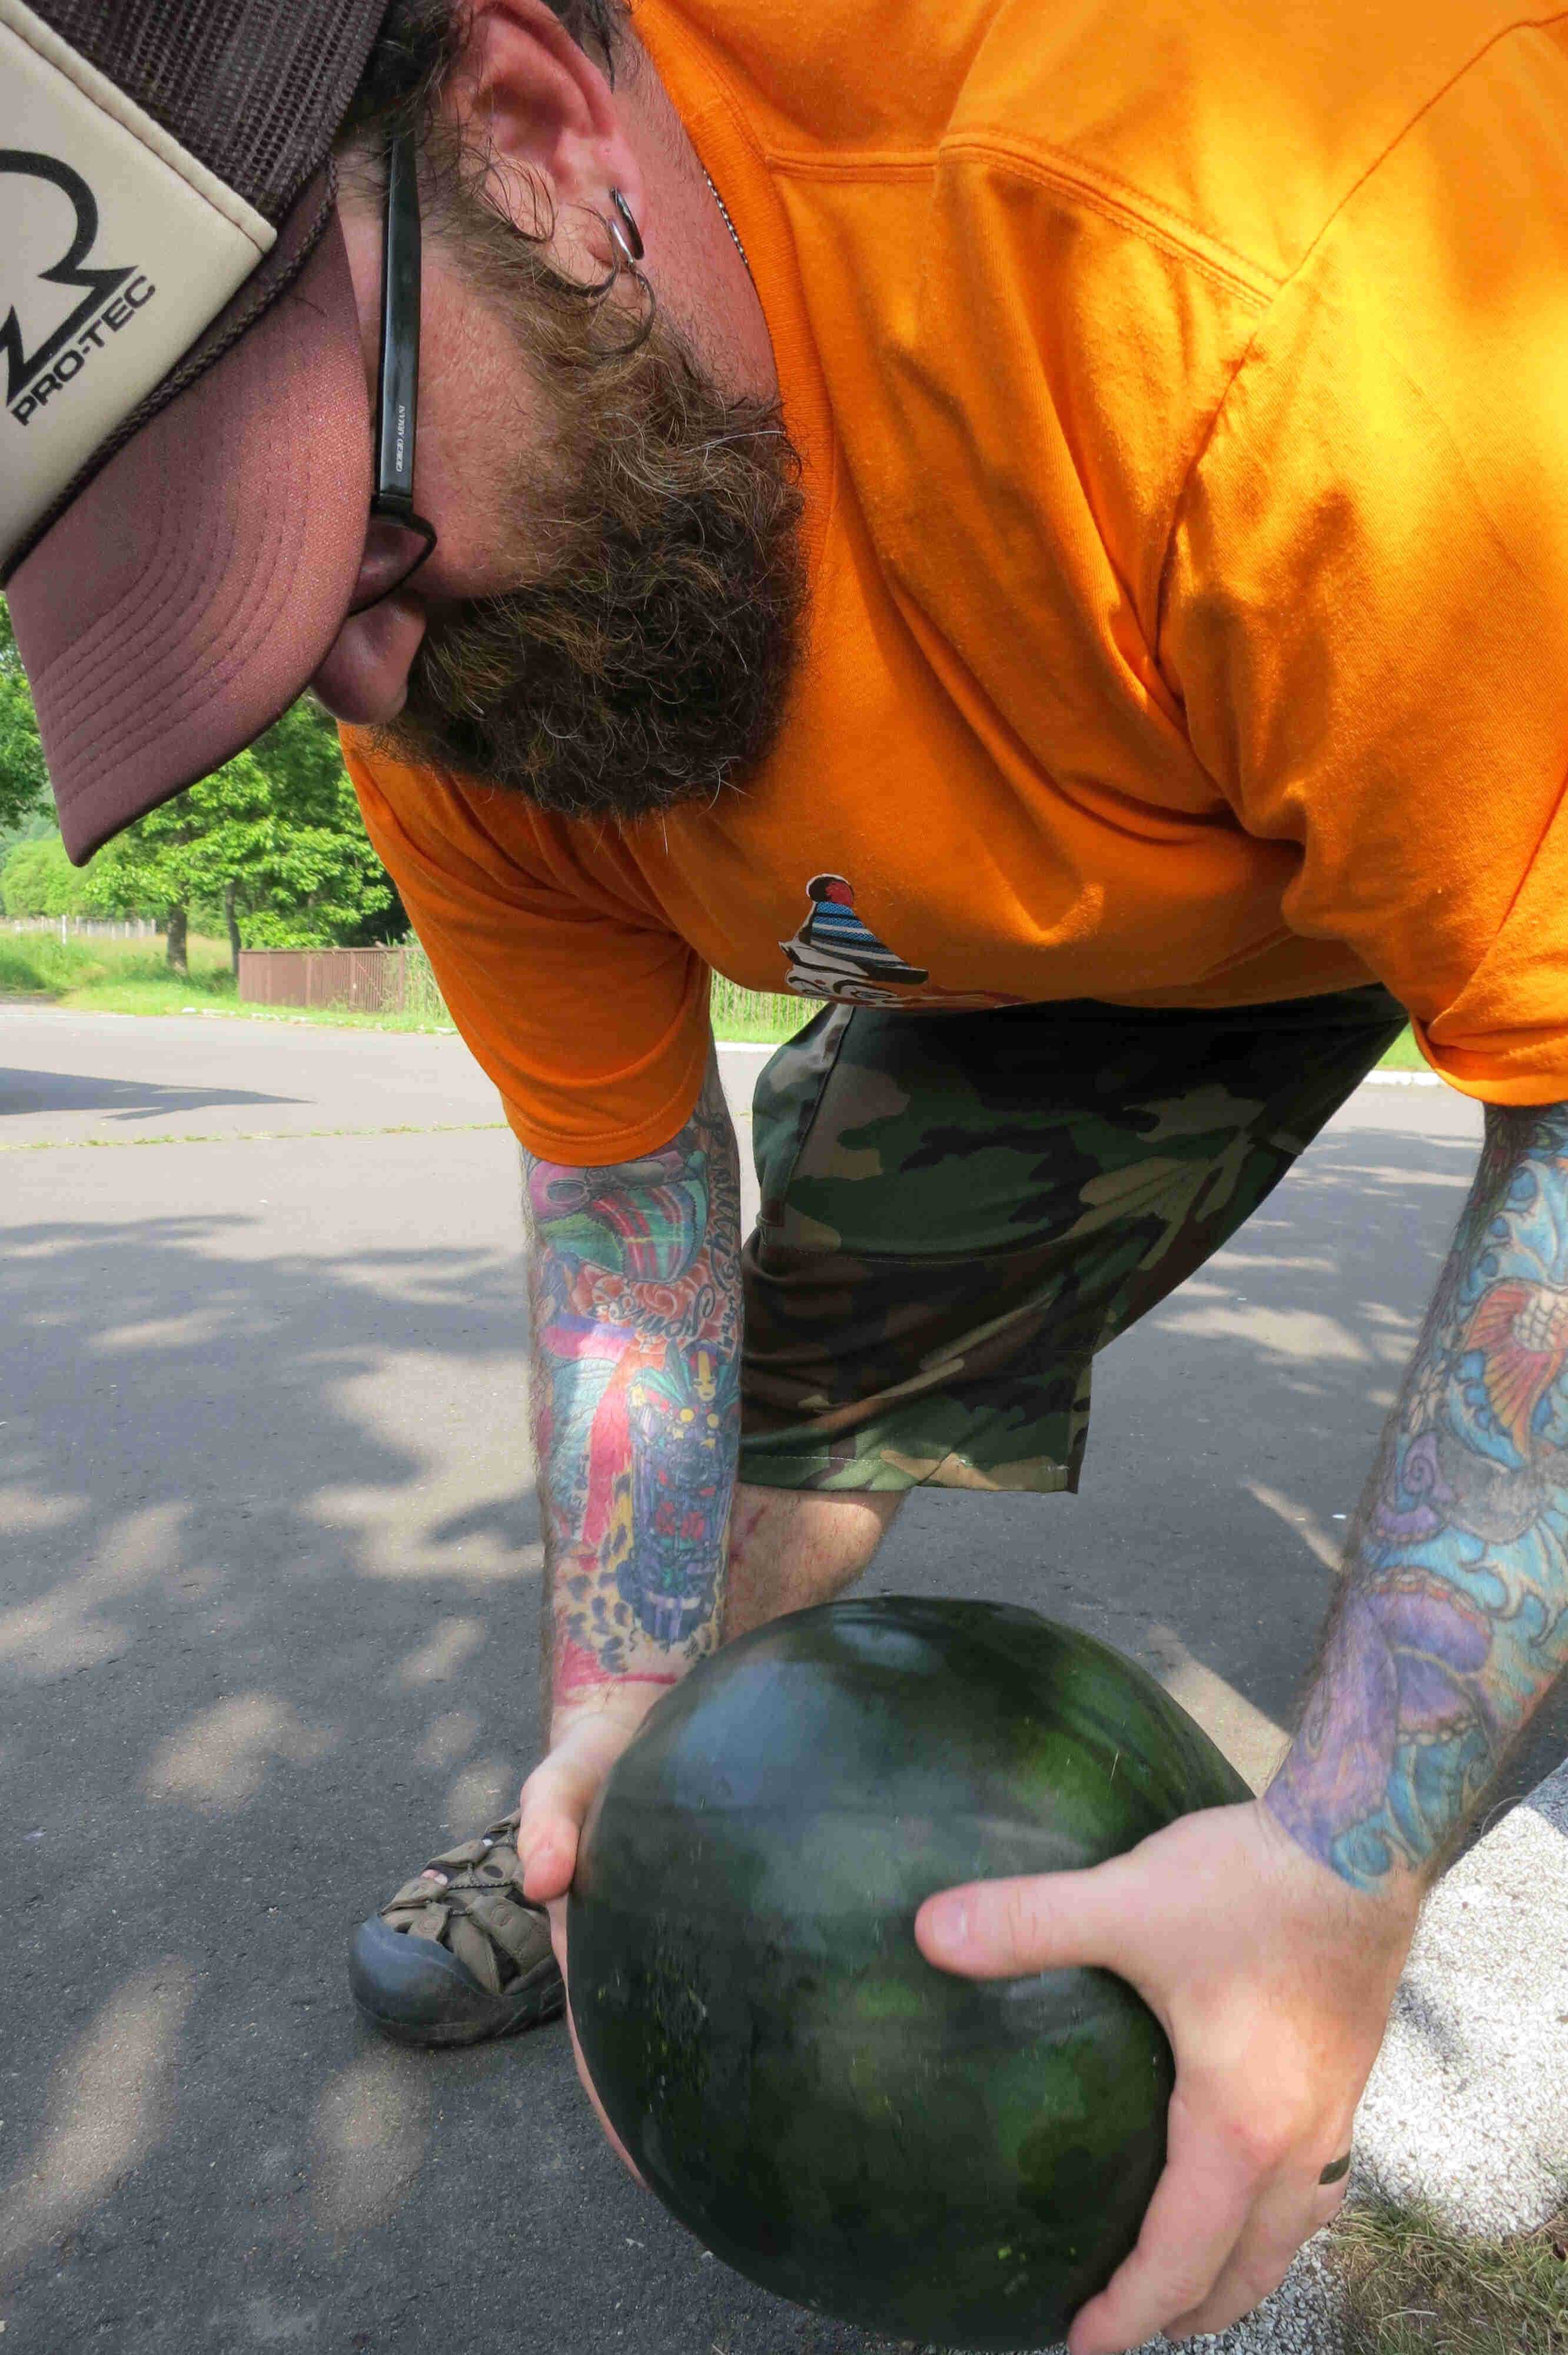 Front view of a person with a beard and tattooed arms, wearing a hat and glasses, leaning over and holding a watermelon